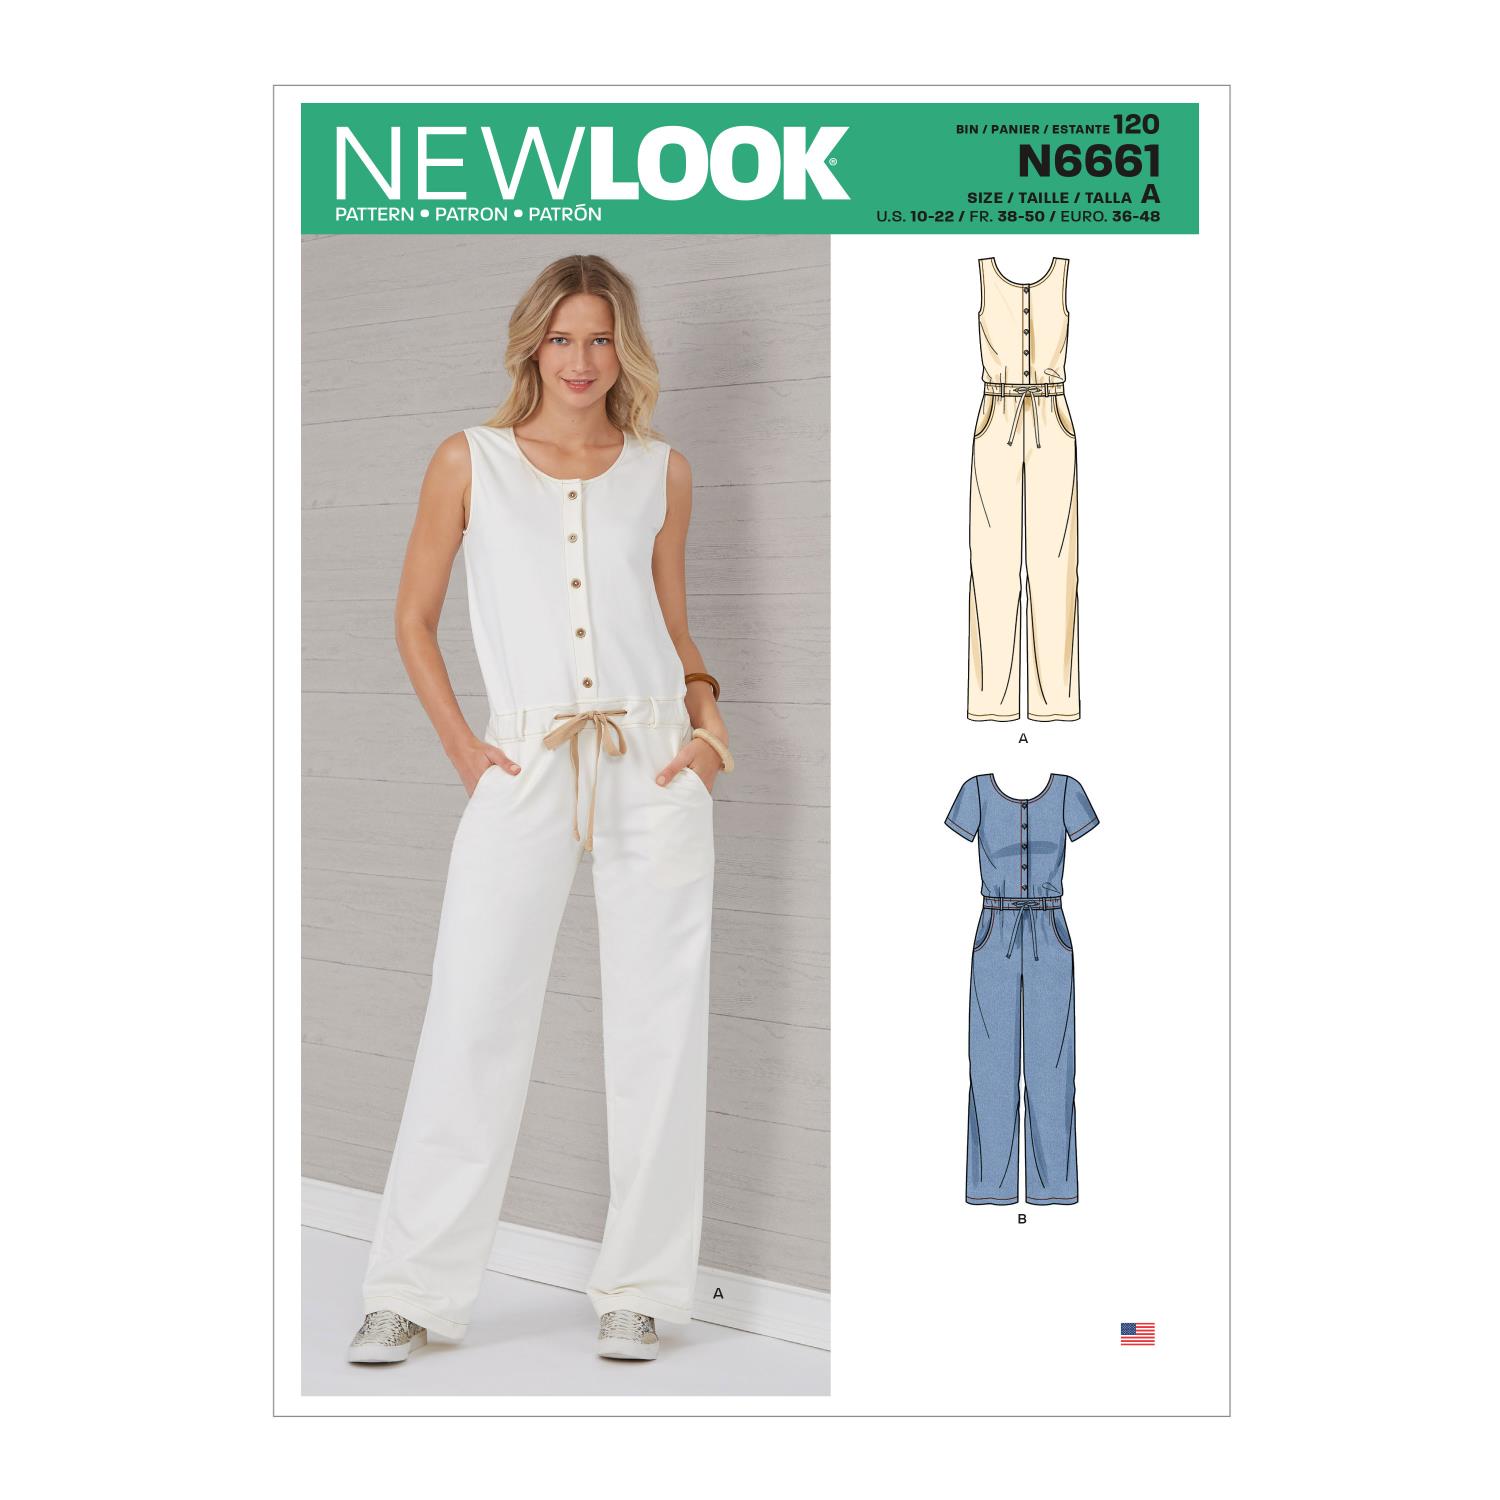 New Look Sewing Pattern N6661 Misses' Relaxed Fit Jumpsuit With Drawstring Waist